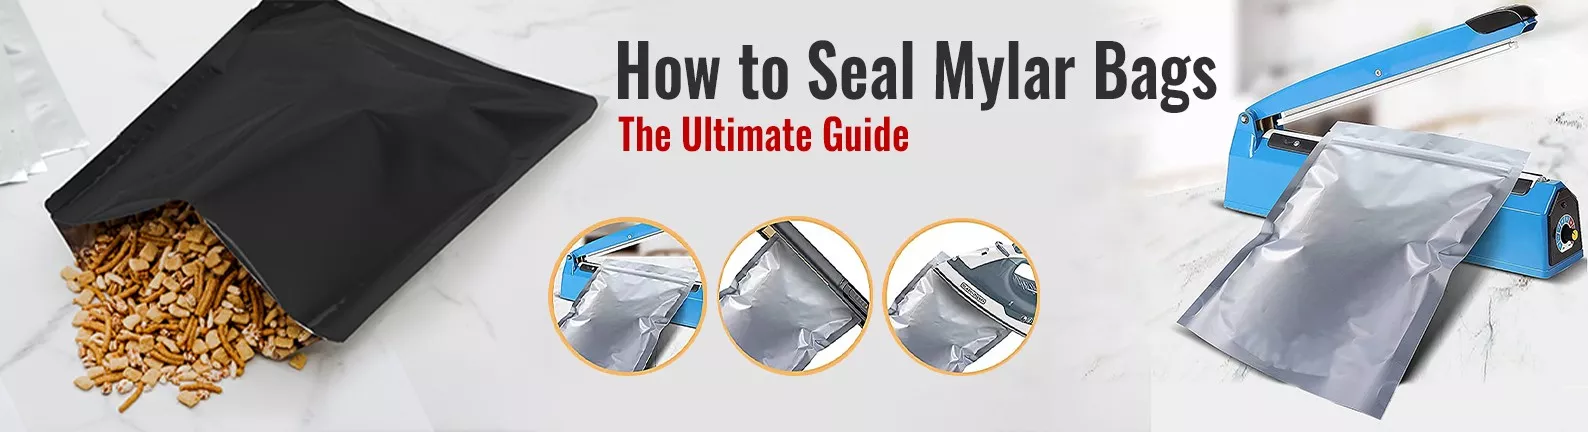 How to Seal Mylar Bags